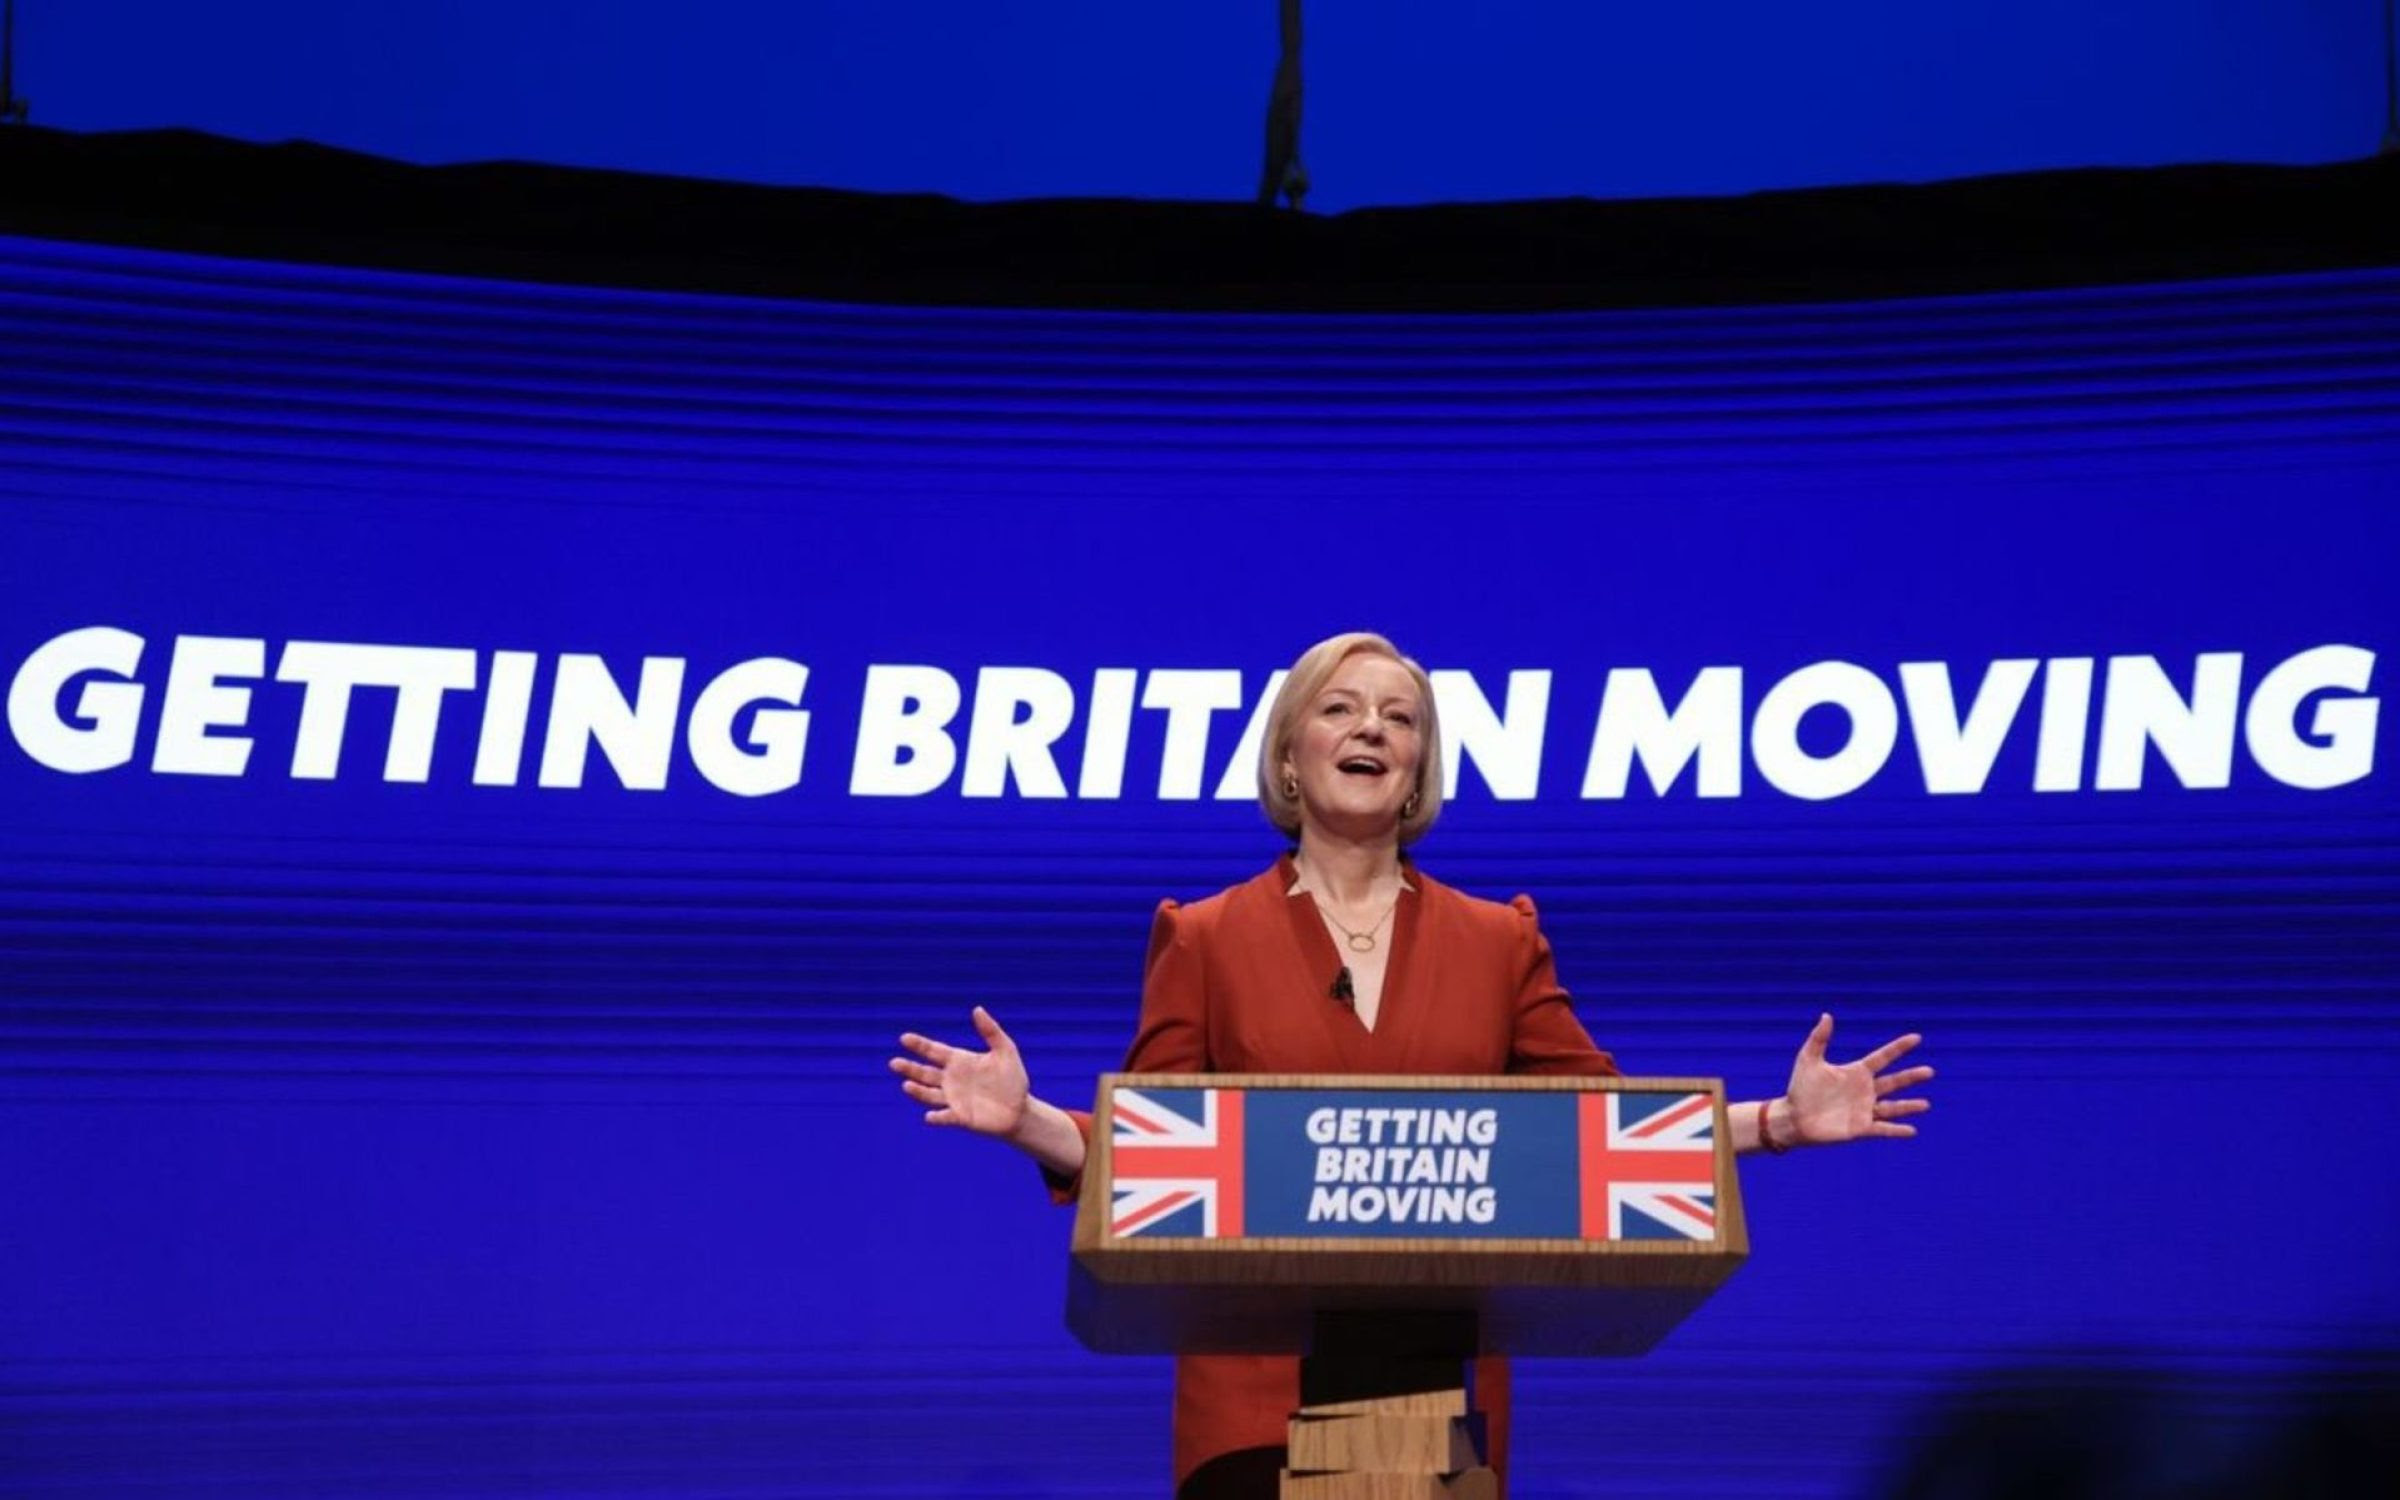 Liz Truss Conservative Party conference speech in full - Reaction